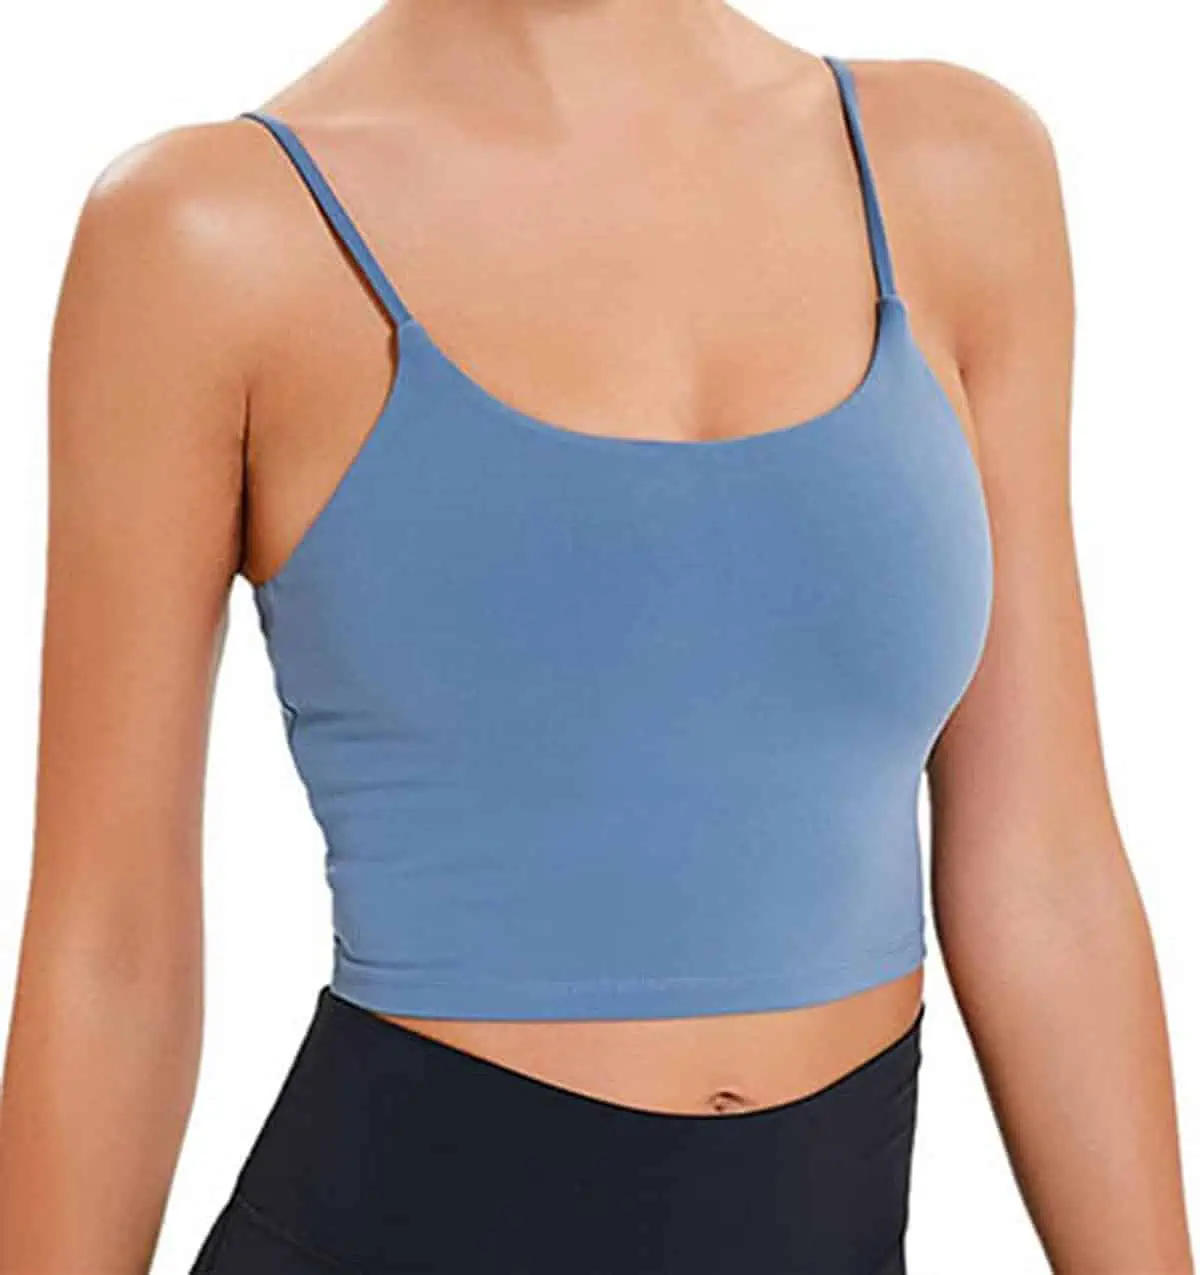 10 Best Yoga Tops with a Built In Bra for Full Support + Comfort